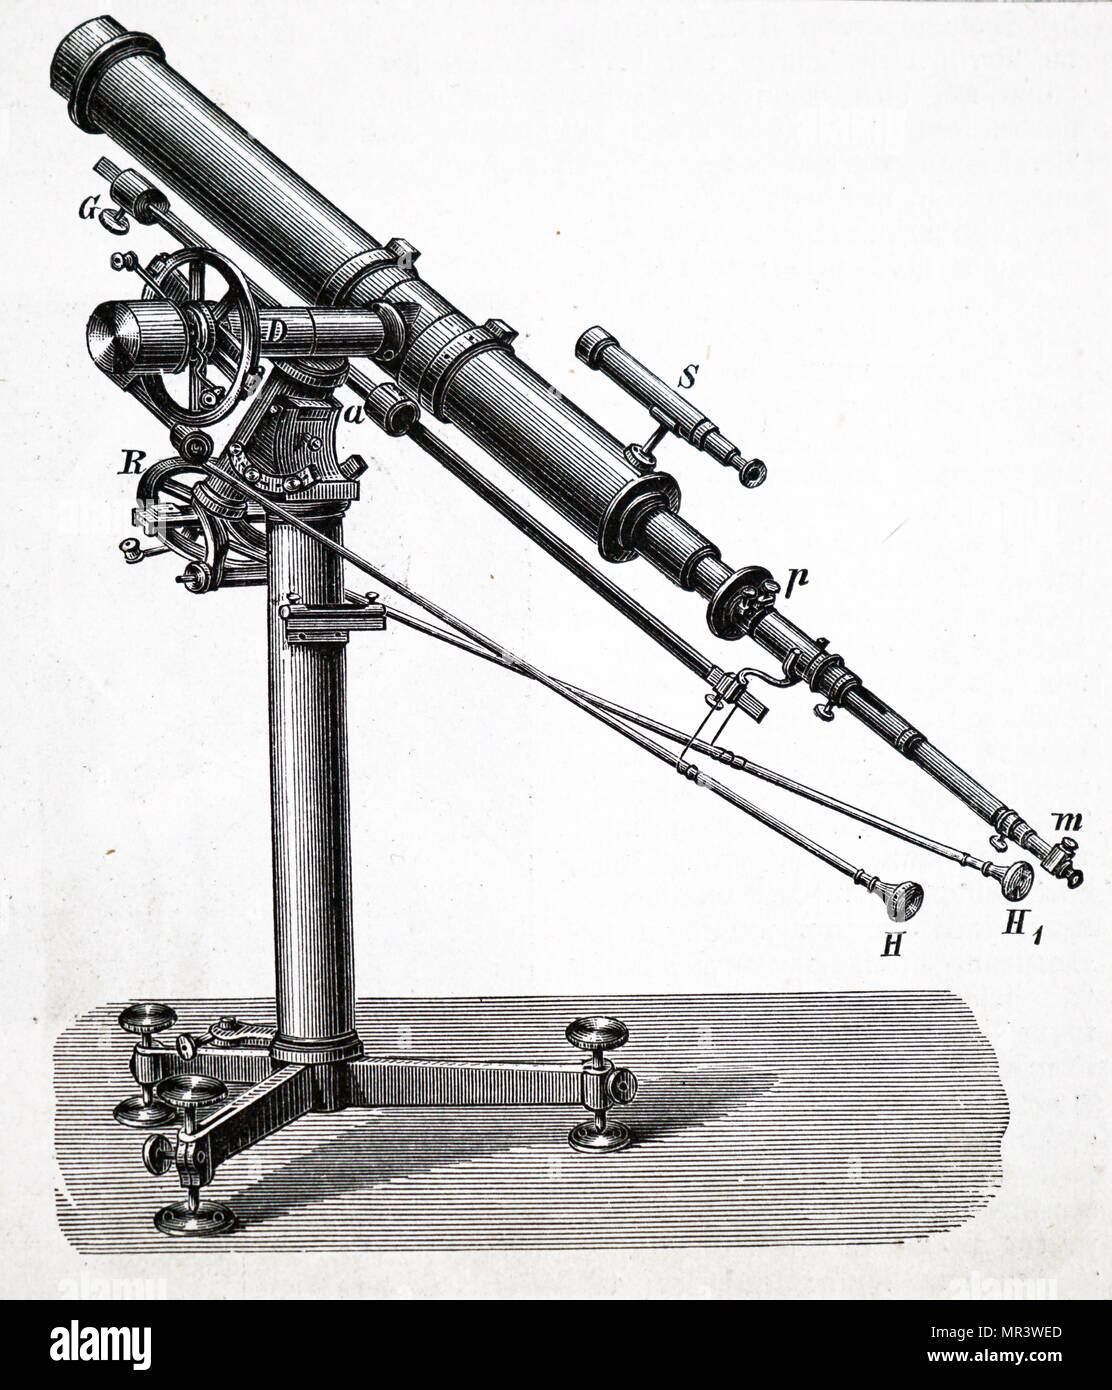 Illustration depicting a small equatorially mounted refracting telescope fitted with a spectroscope (M, P) used for studying solar spectra. Dated 19th century Stock Photo